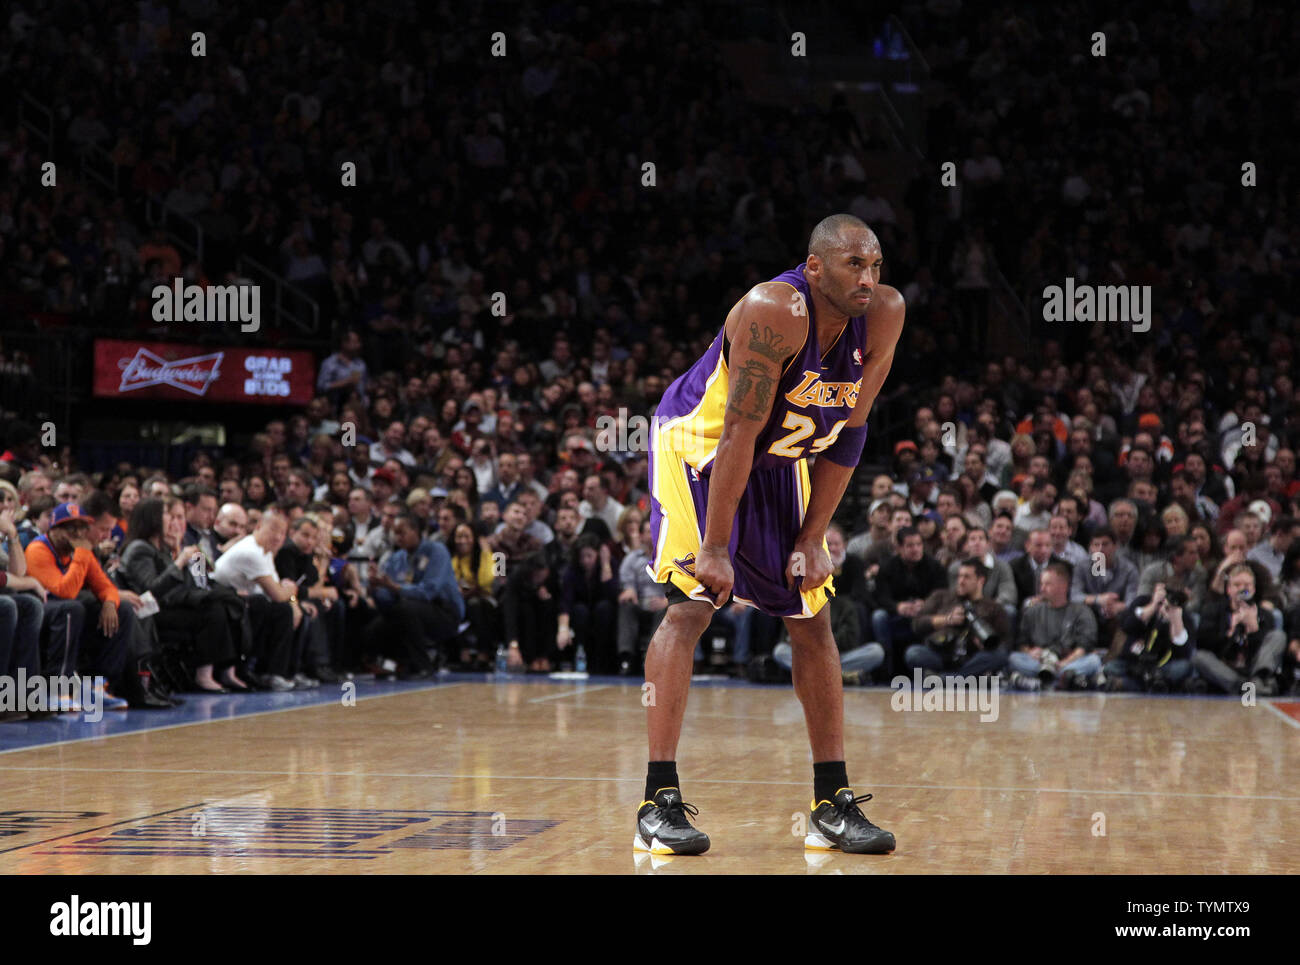 Kobe Bryant, Lakers shooting guard, stands ready to shoot a free